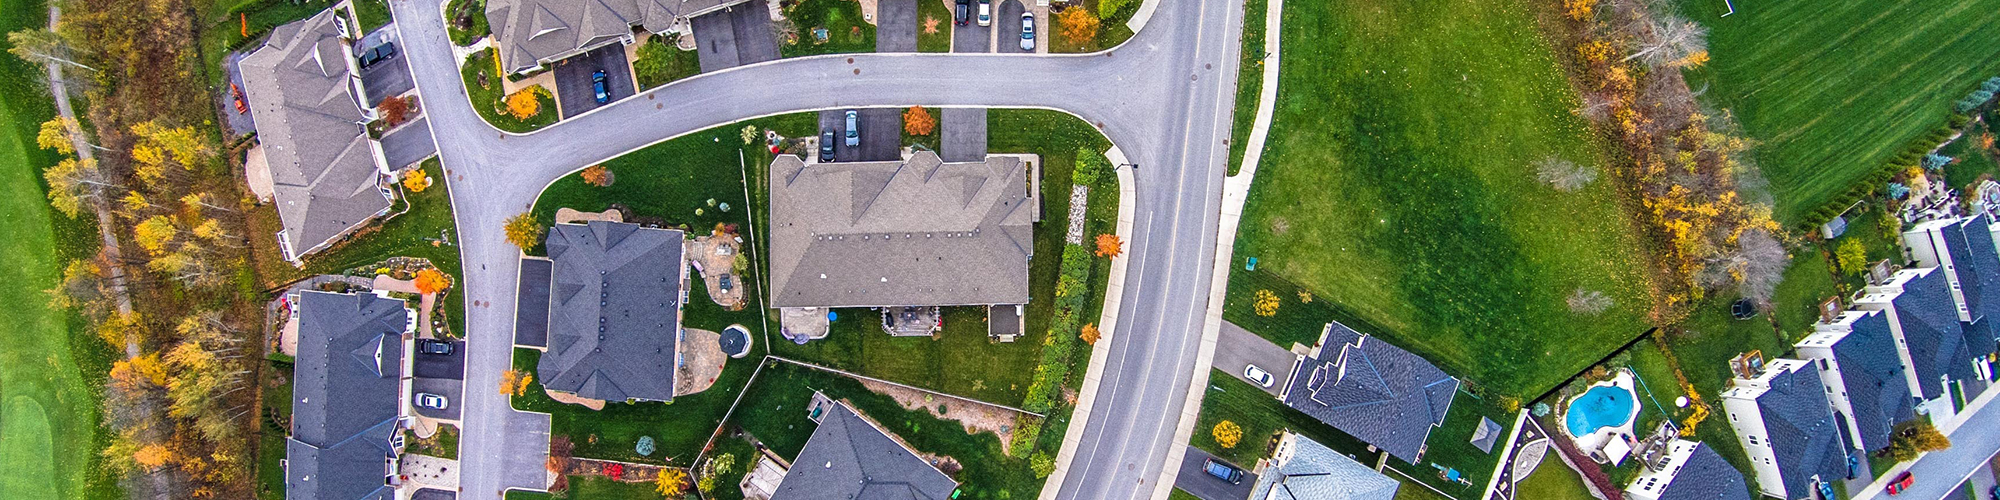 Aerial Photography of Homes and Streets